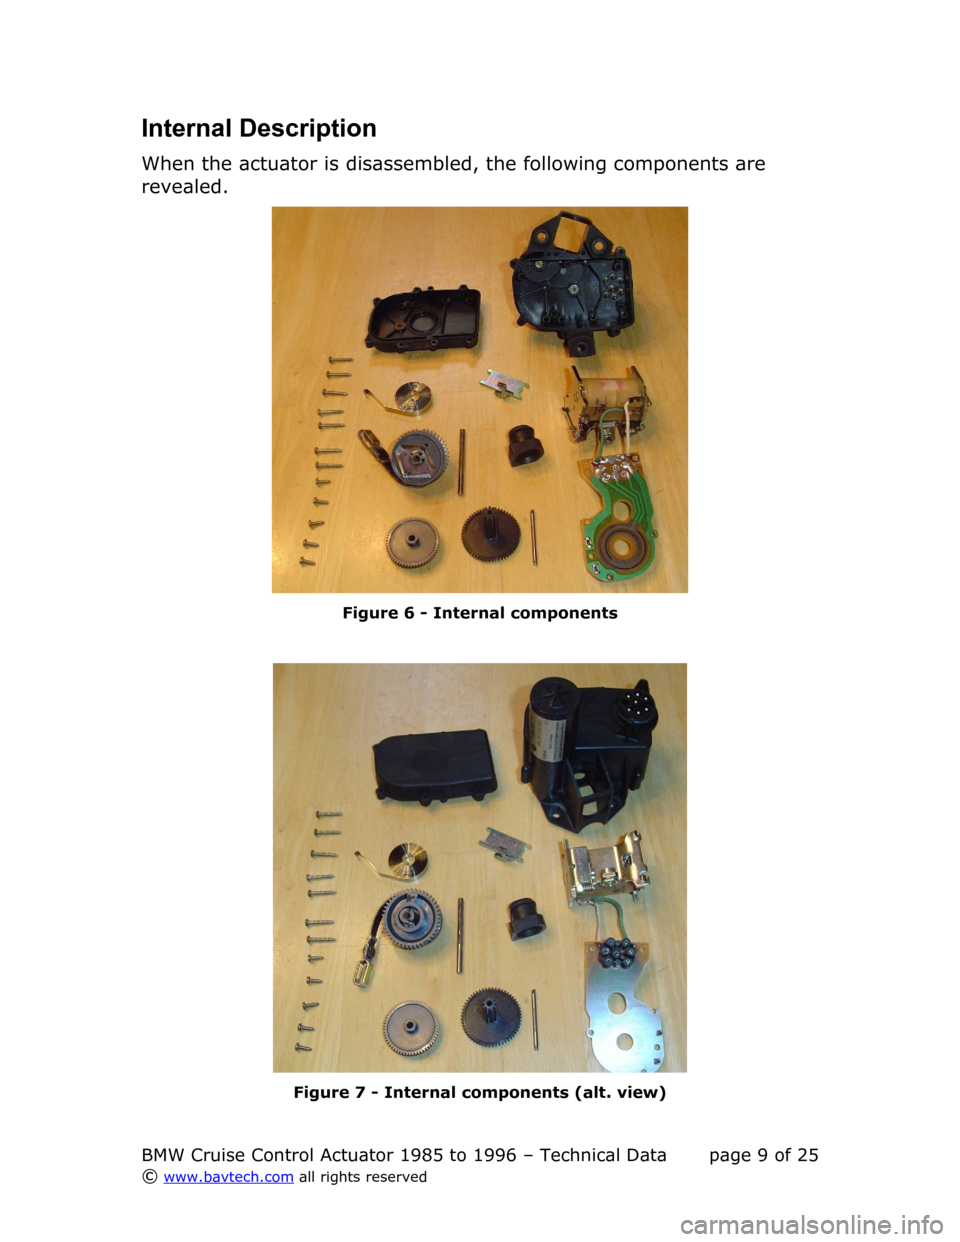 BMW 5 SERIES 1987 E34 Cruise Control Acutator Internal Description
When the actuator is disassembled, the following components are  
revealed.
Figure  6  - Internal components
Figure  7  - Internal components (alt. view)
BMW Cruise Control Actuat